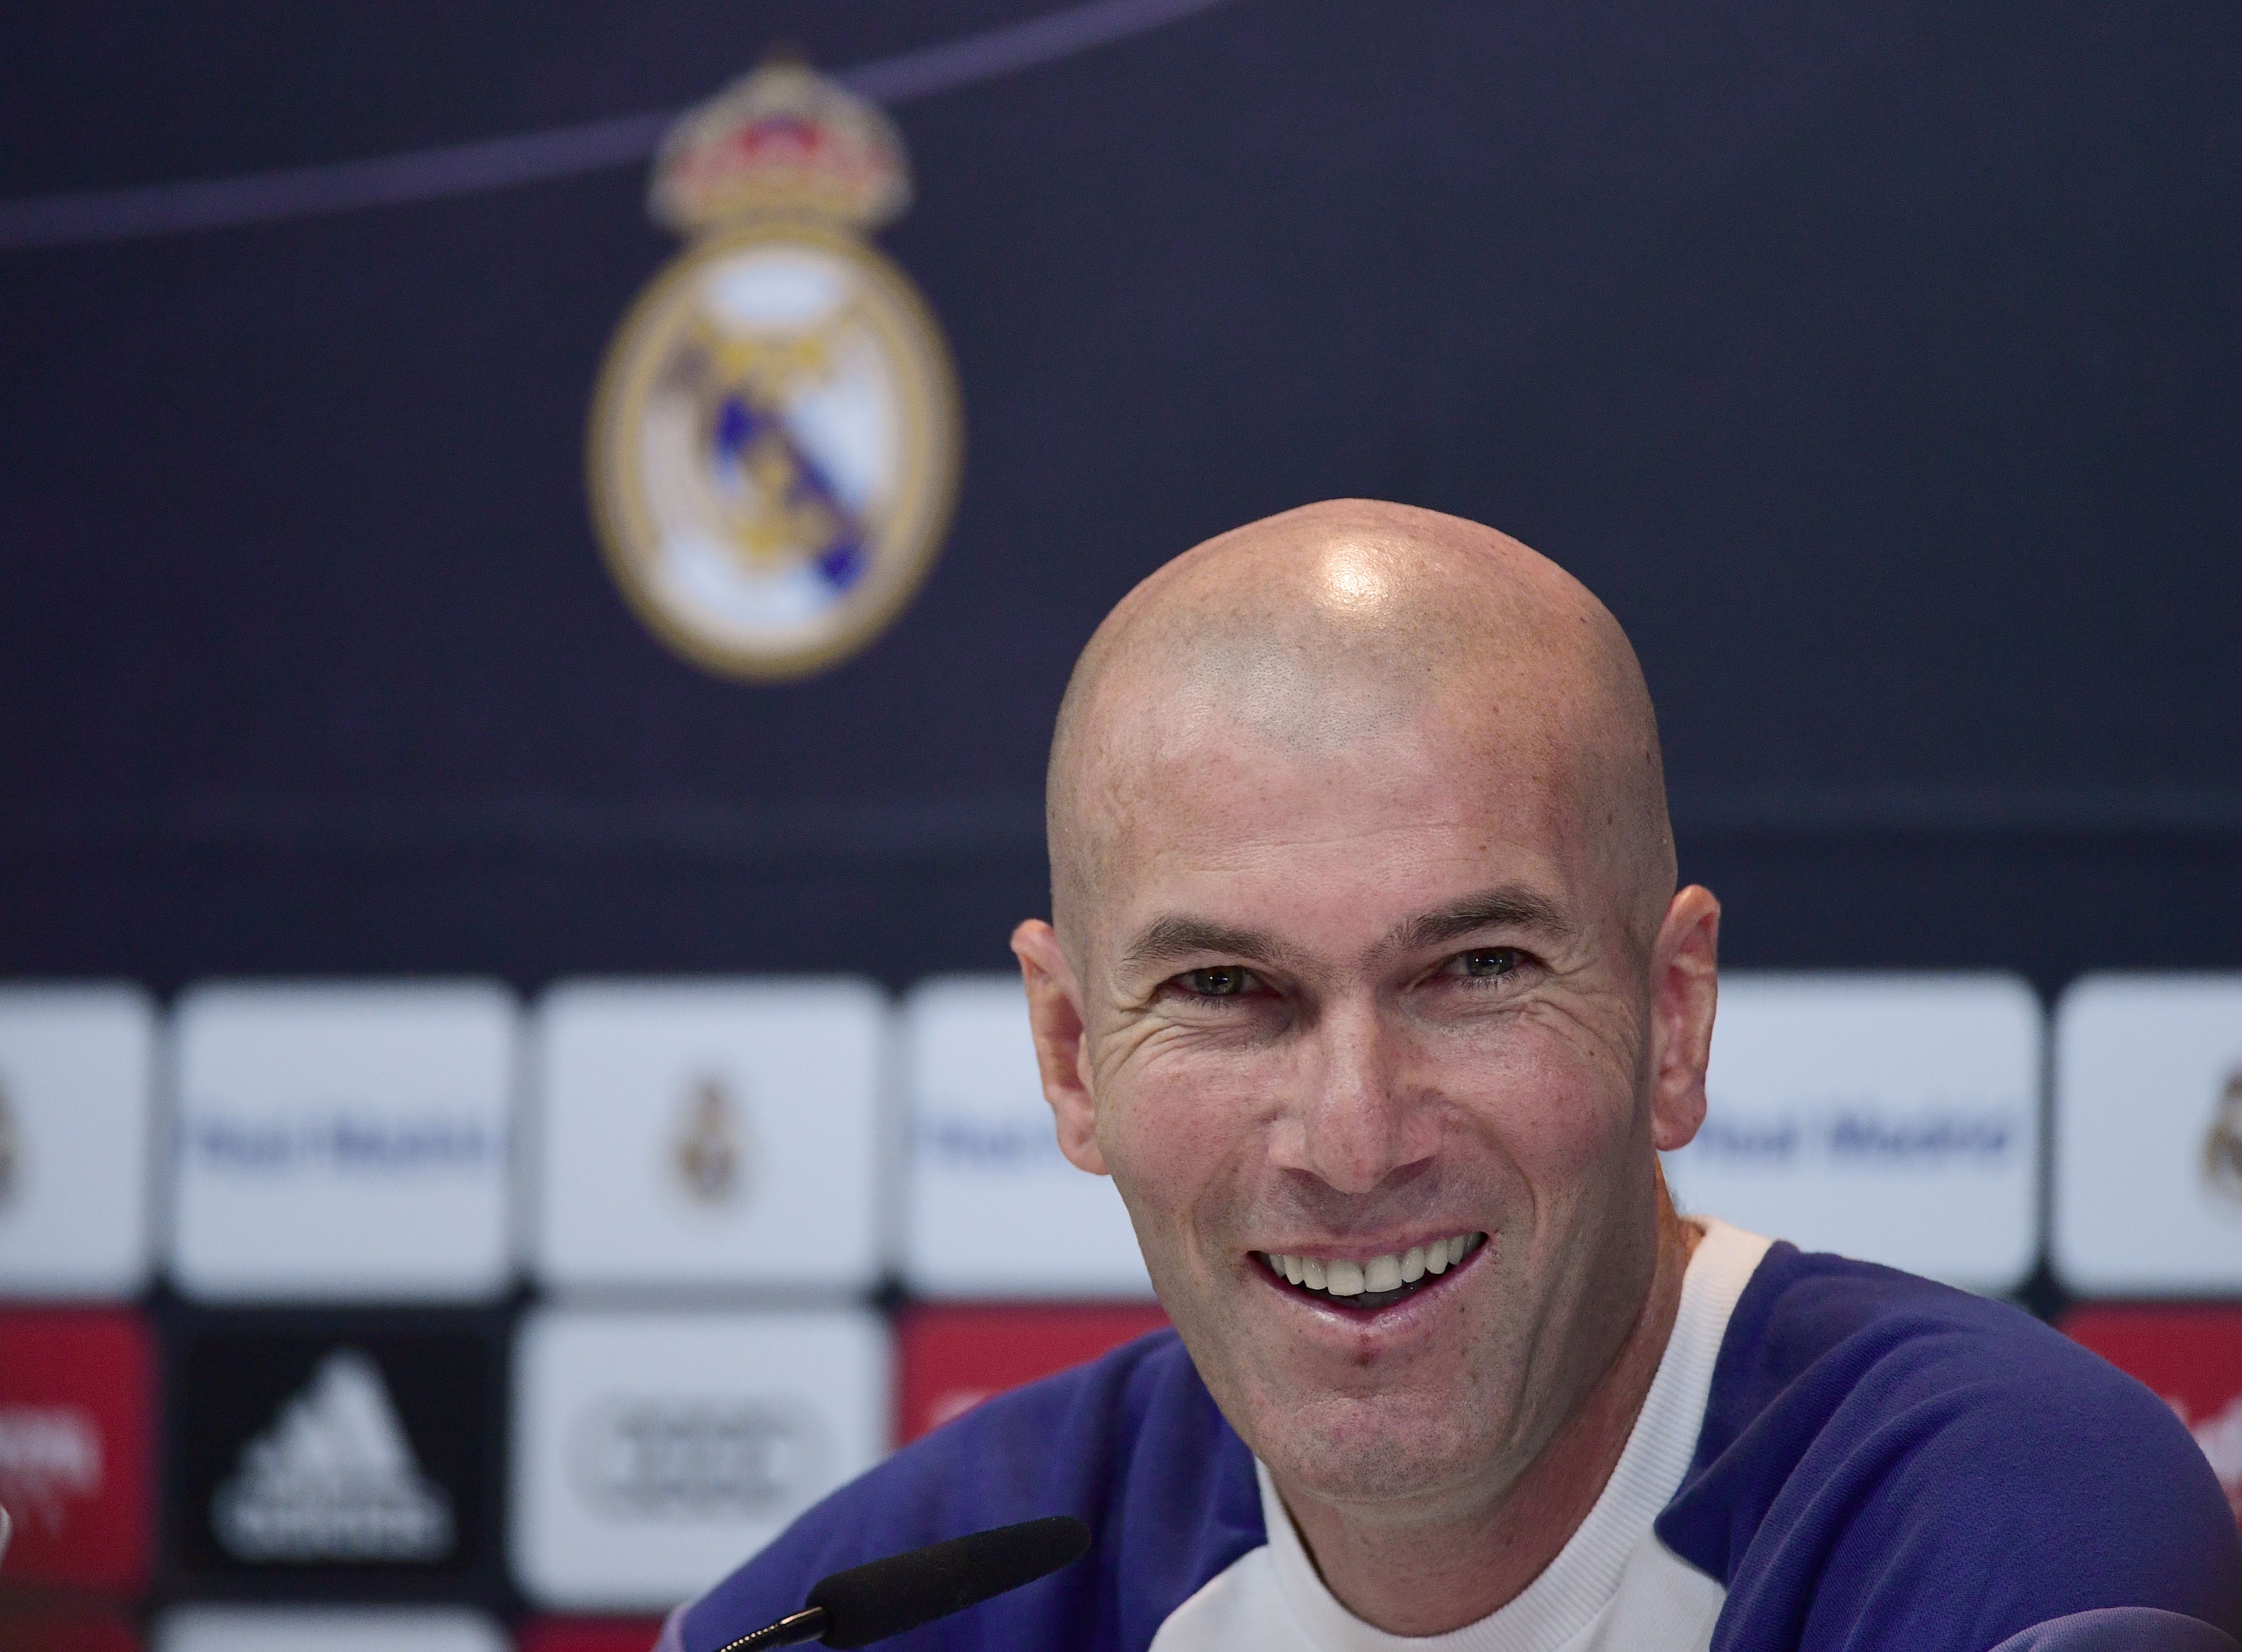 Zinedine Zidane was delighted after Real Madrid's 3-0 win over Real Sociedad. (Picture Courtesy - AFP/Getty Images)